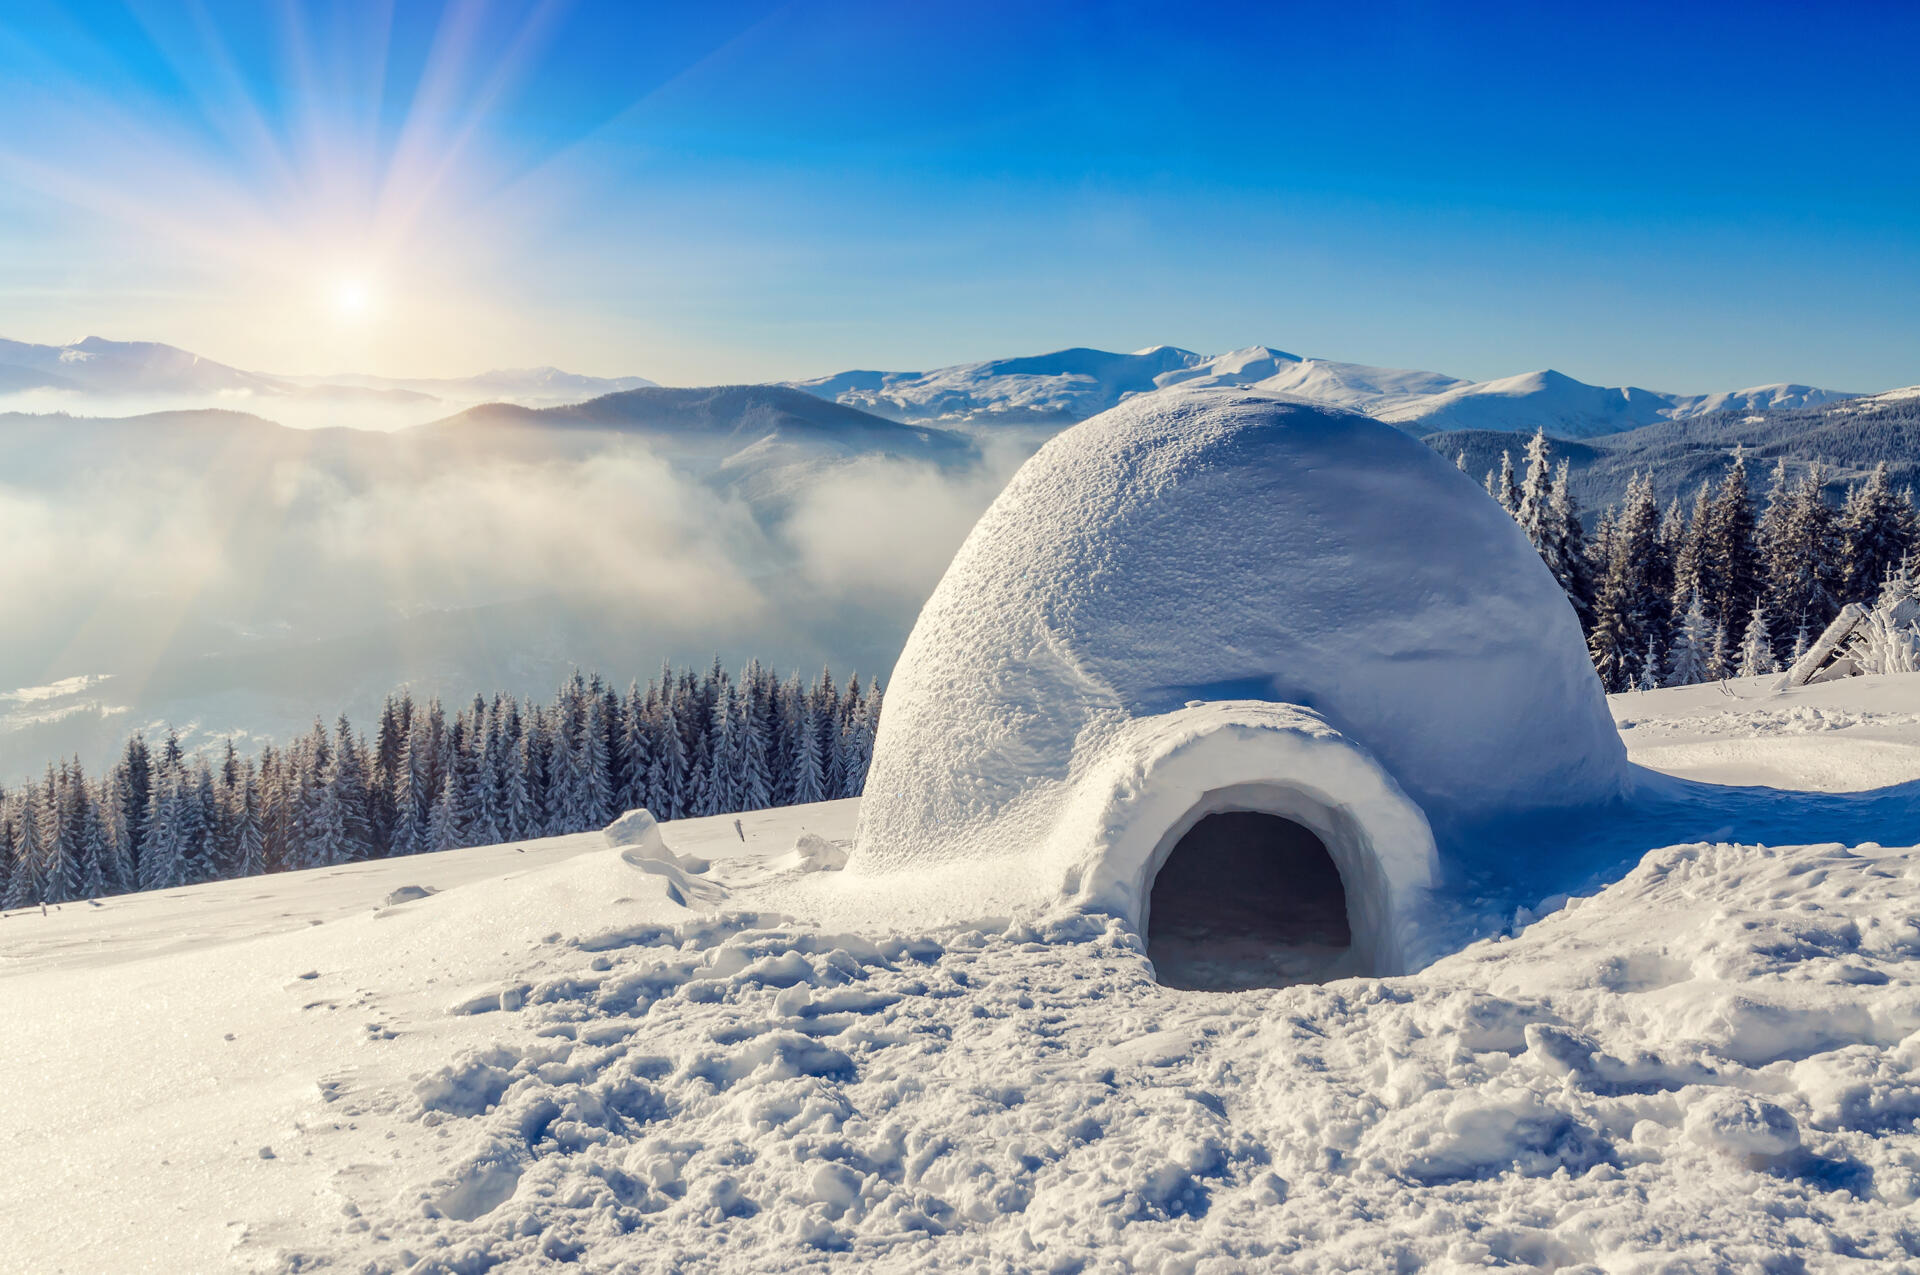 real snow igloo in the mountains under blue sky and sun